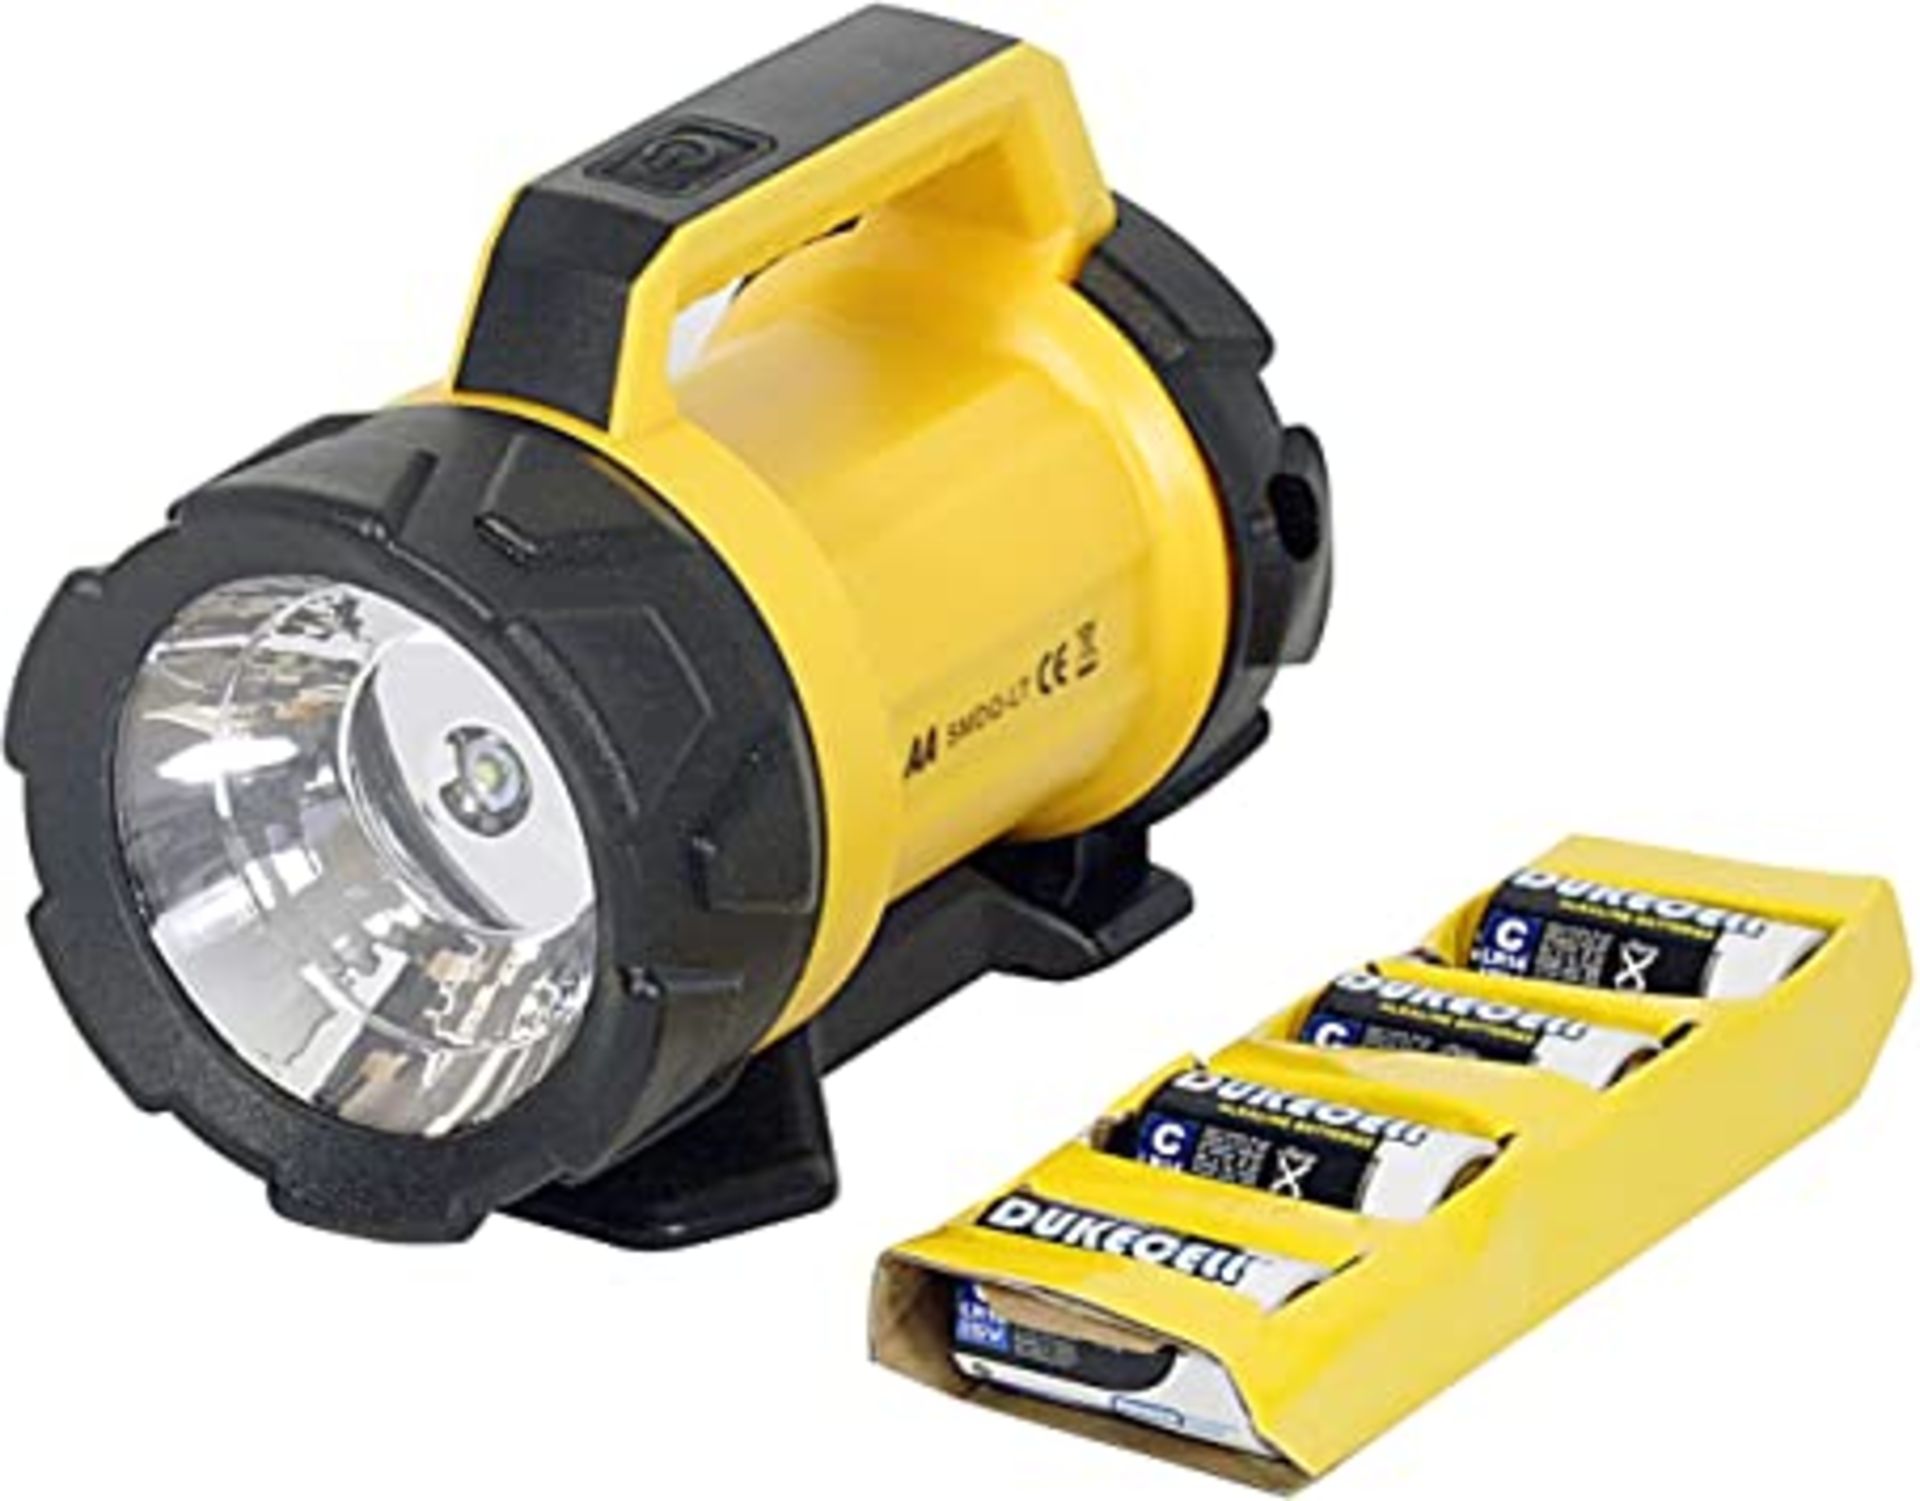 RRP - £17.95 AA Heavy Duty LED Torch AA3881 180 m Beam Distance, Adjustable Base 6 Angles, 120 Lume